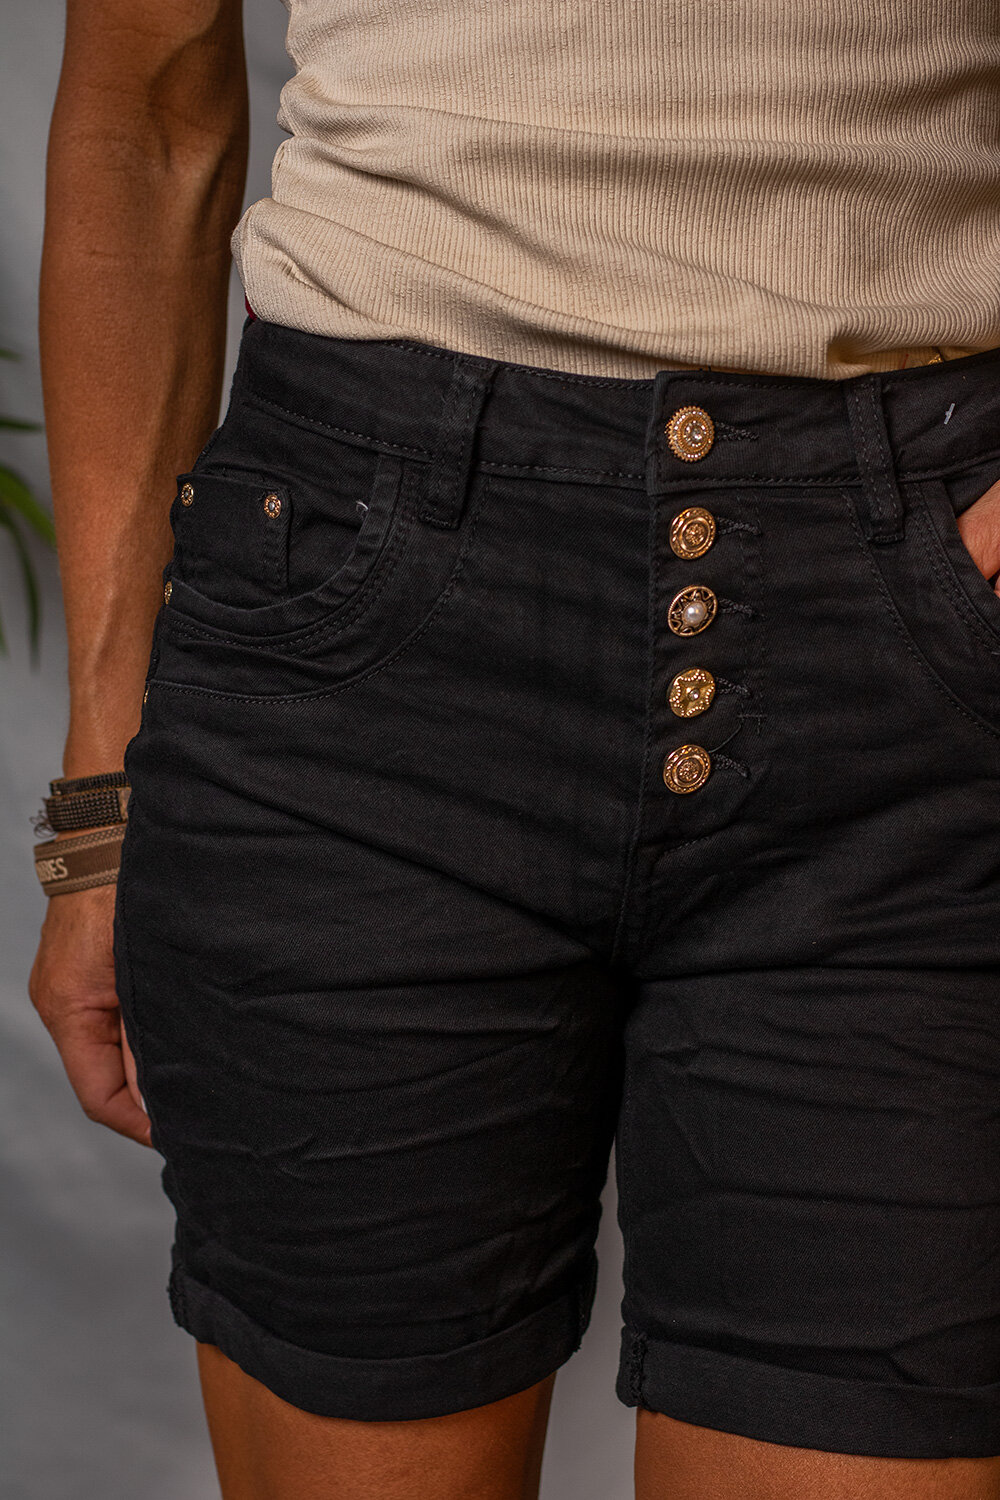 Shorts 1859 - Gold Buttons - Black